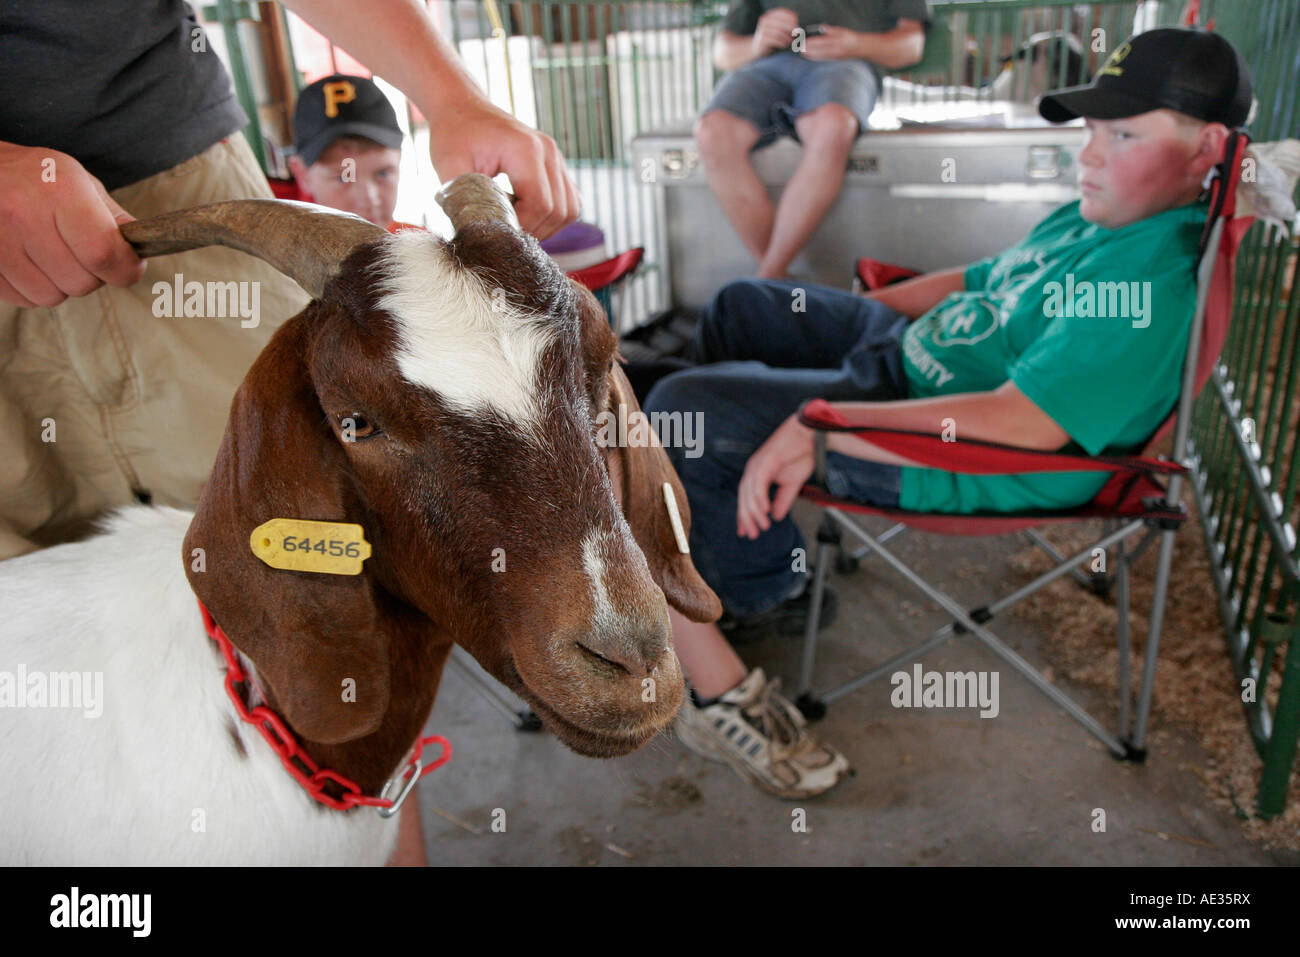 Valparaiso Indiana,Porter County Fair,4 H Club,agriculture,boy boys,male kid kids child children youngster youngsters youth youths goat,visitors trave Stock Photo